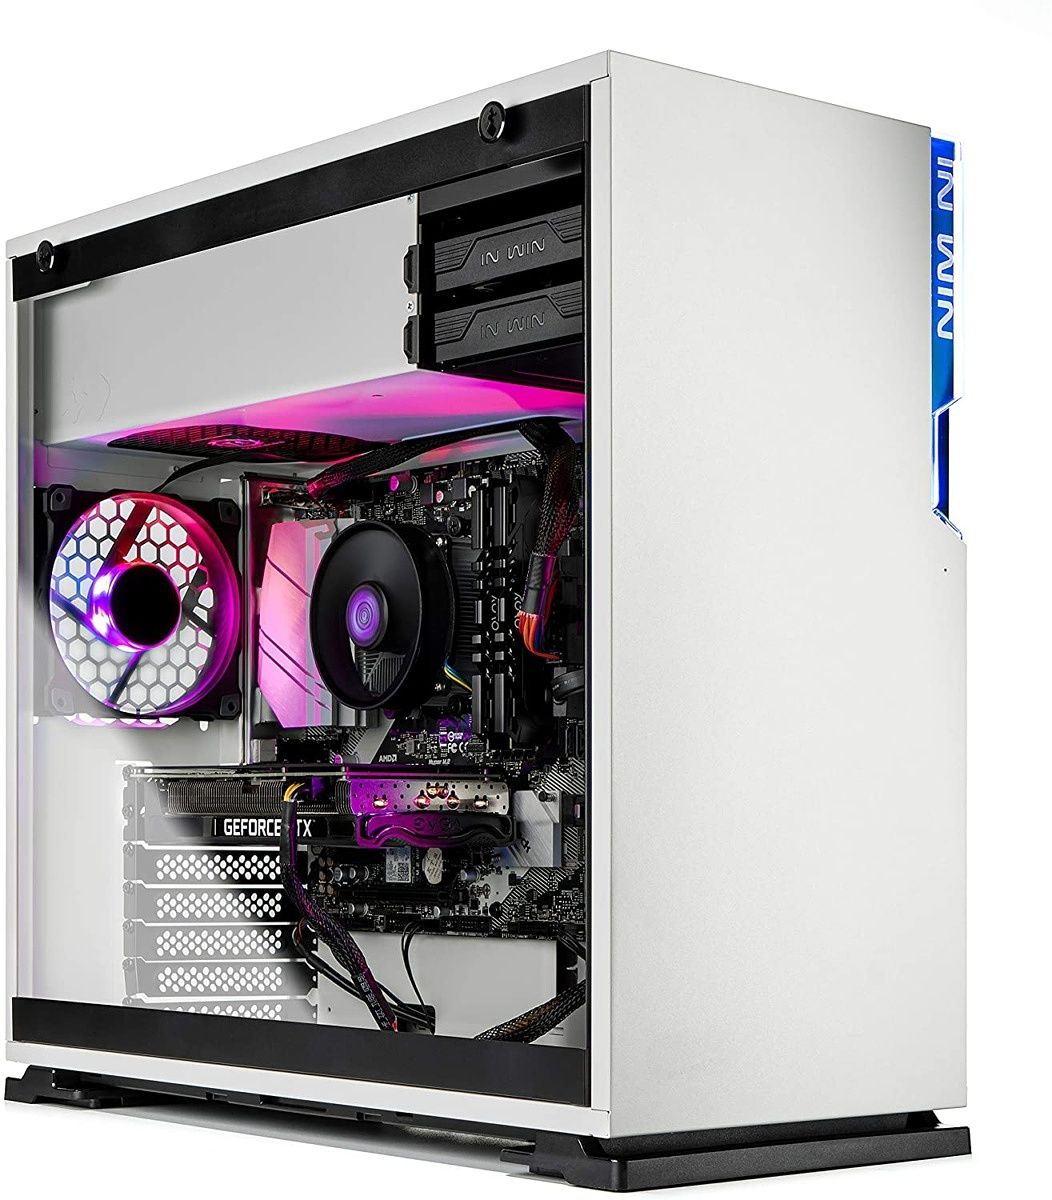 Get this pre-built gaming PC with a Ryzen 5 5600X and an RTX 3060 